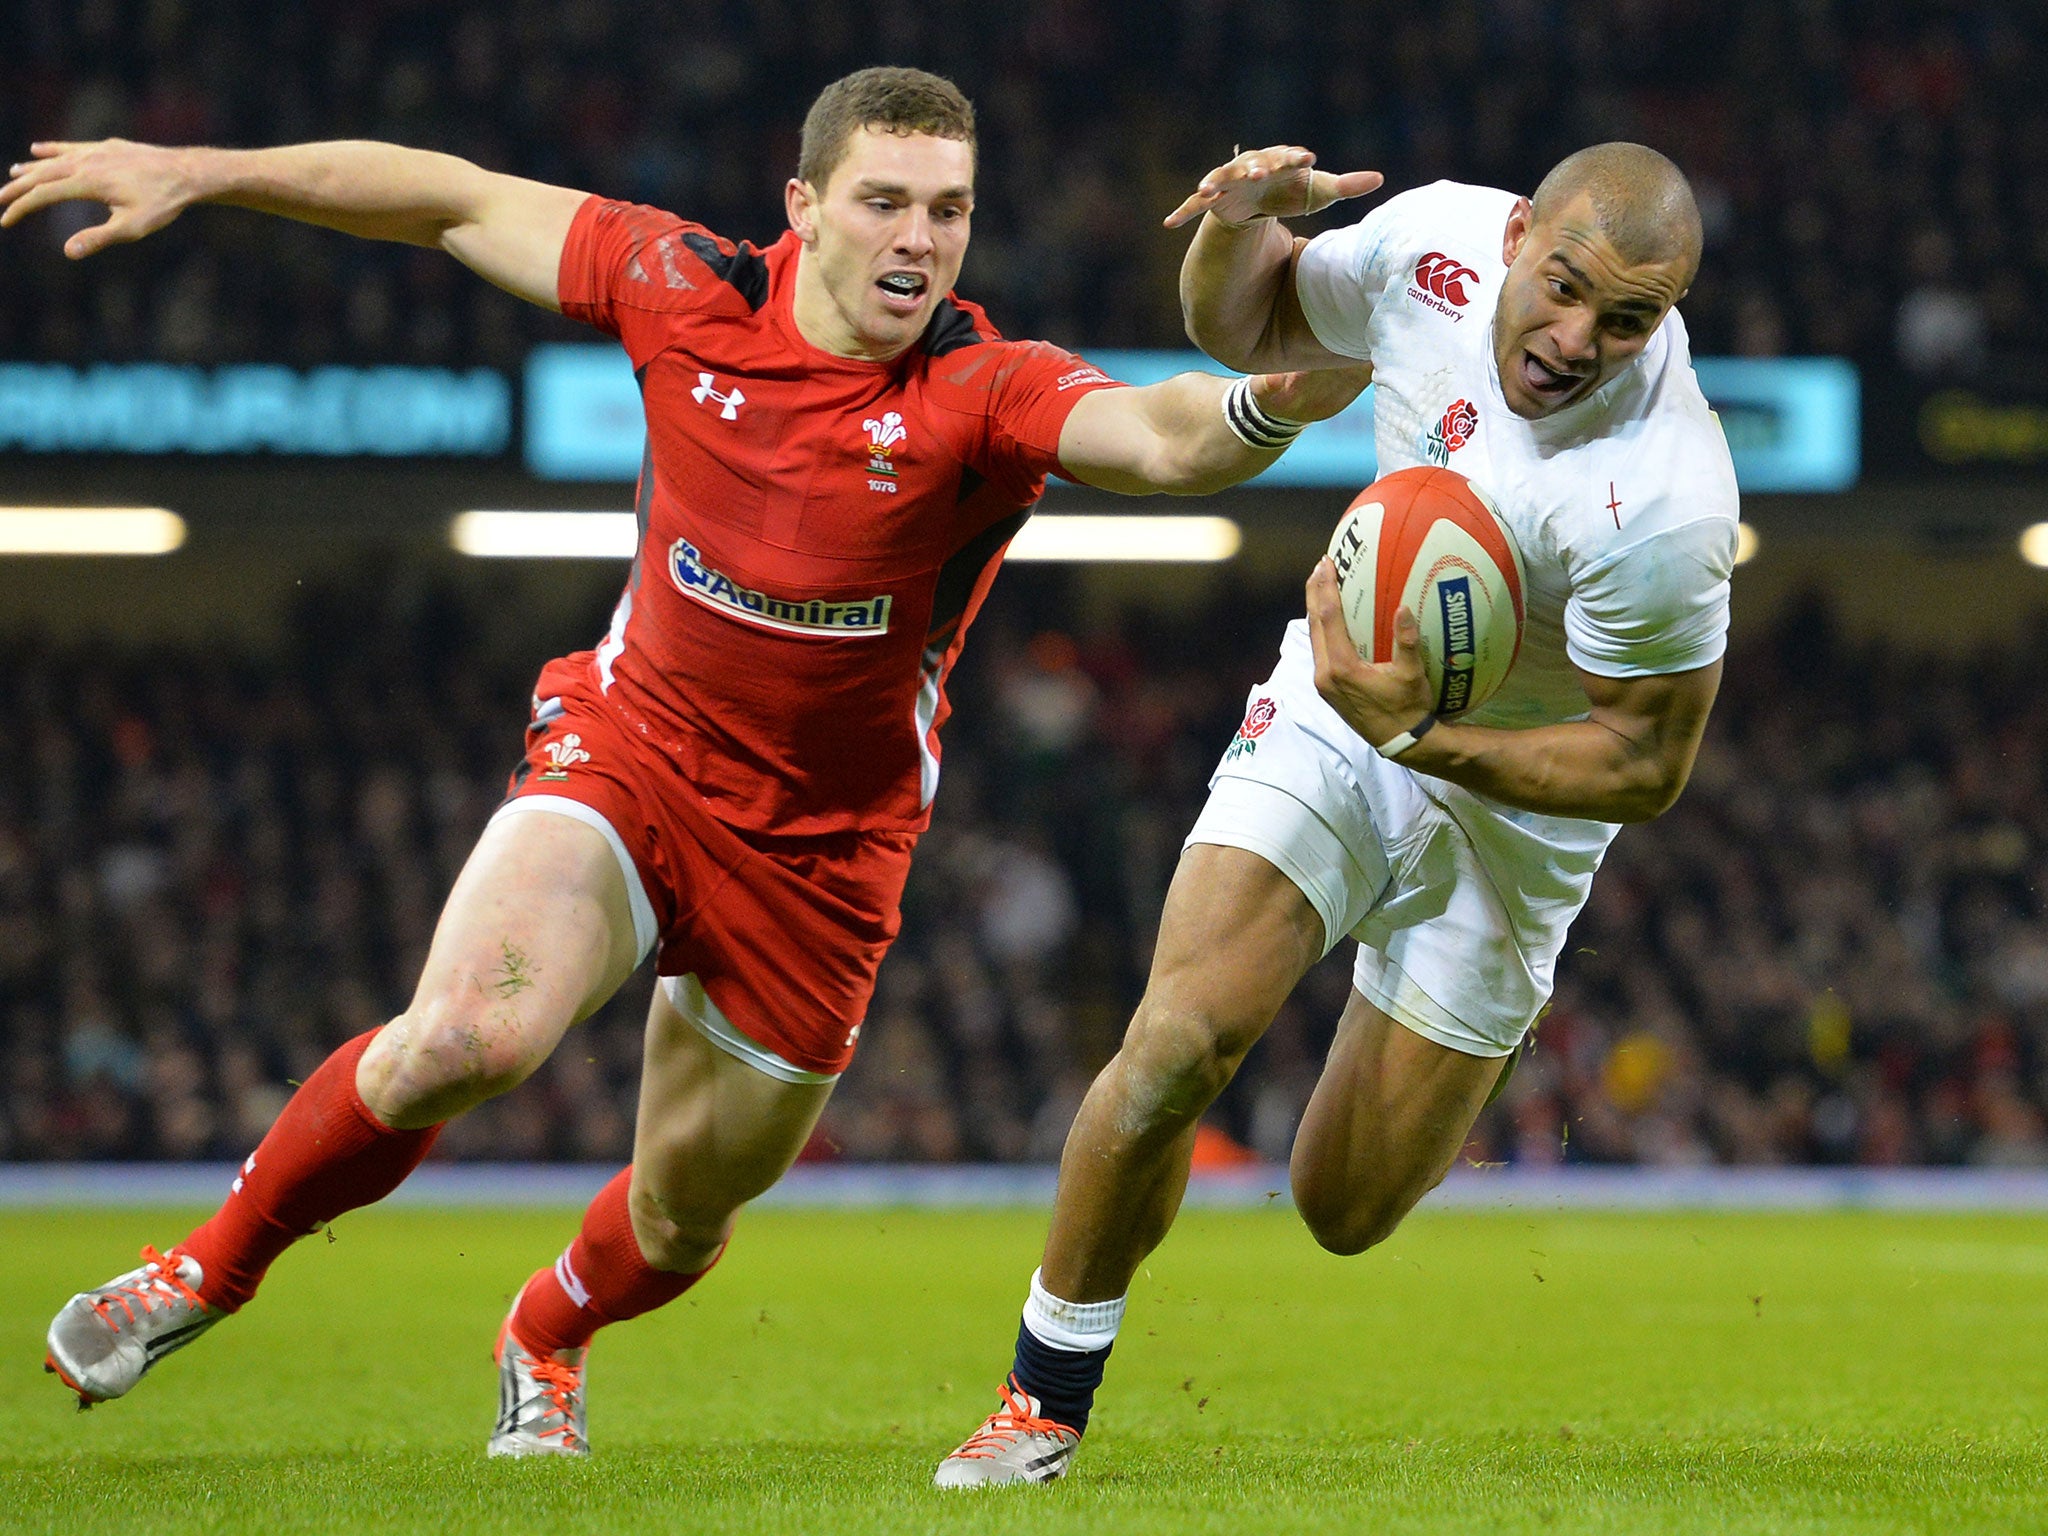 George North was partly at fault for England's second try, scored by Jonathan Joseph